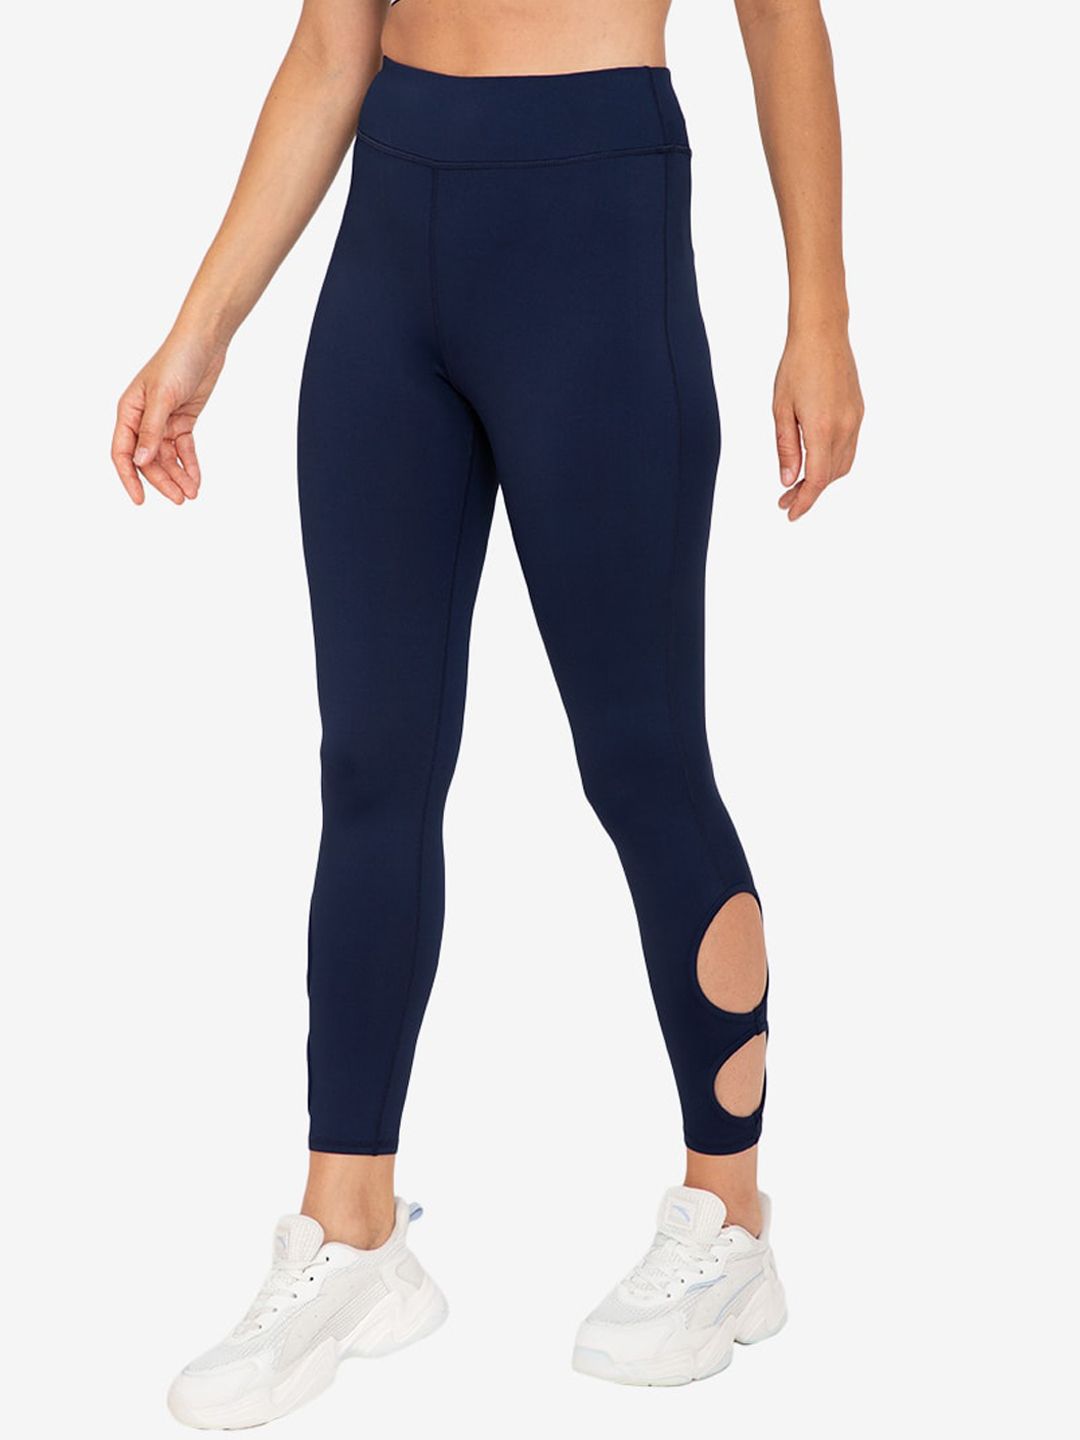 ZALORA ACTIVE Women Navy Blue Sports Cut Out Detail Tights Price in India